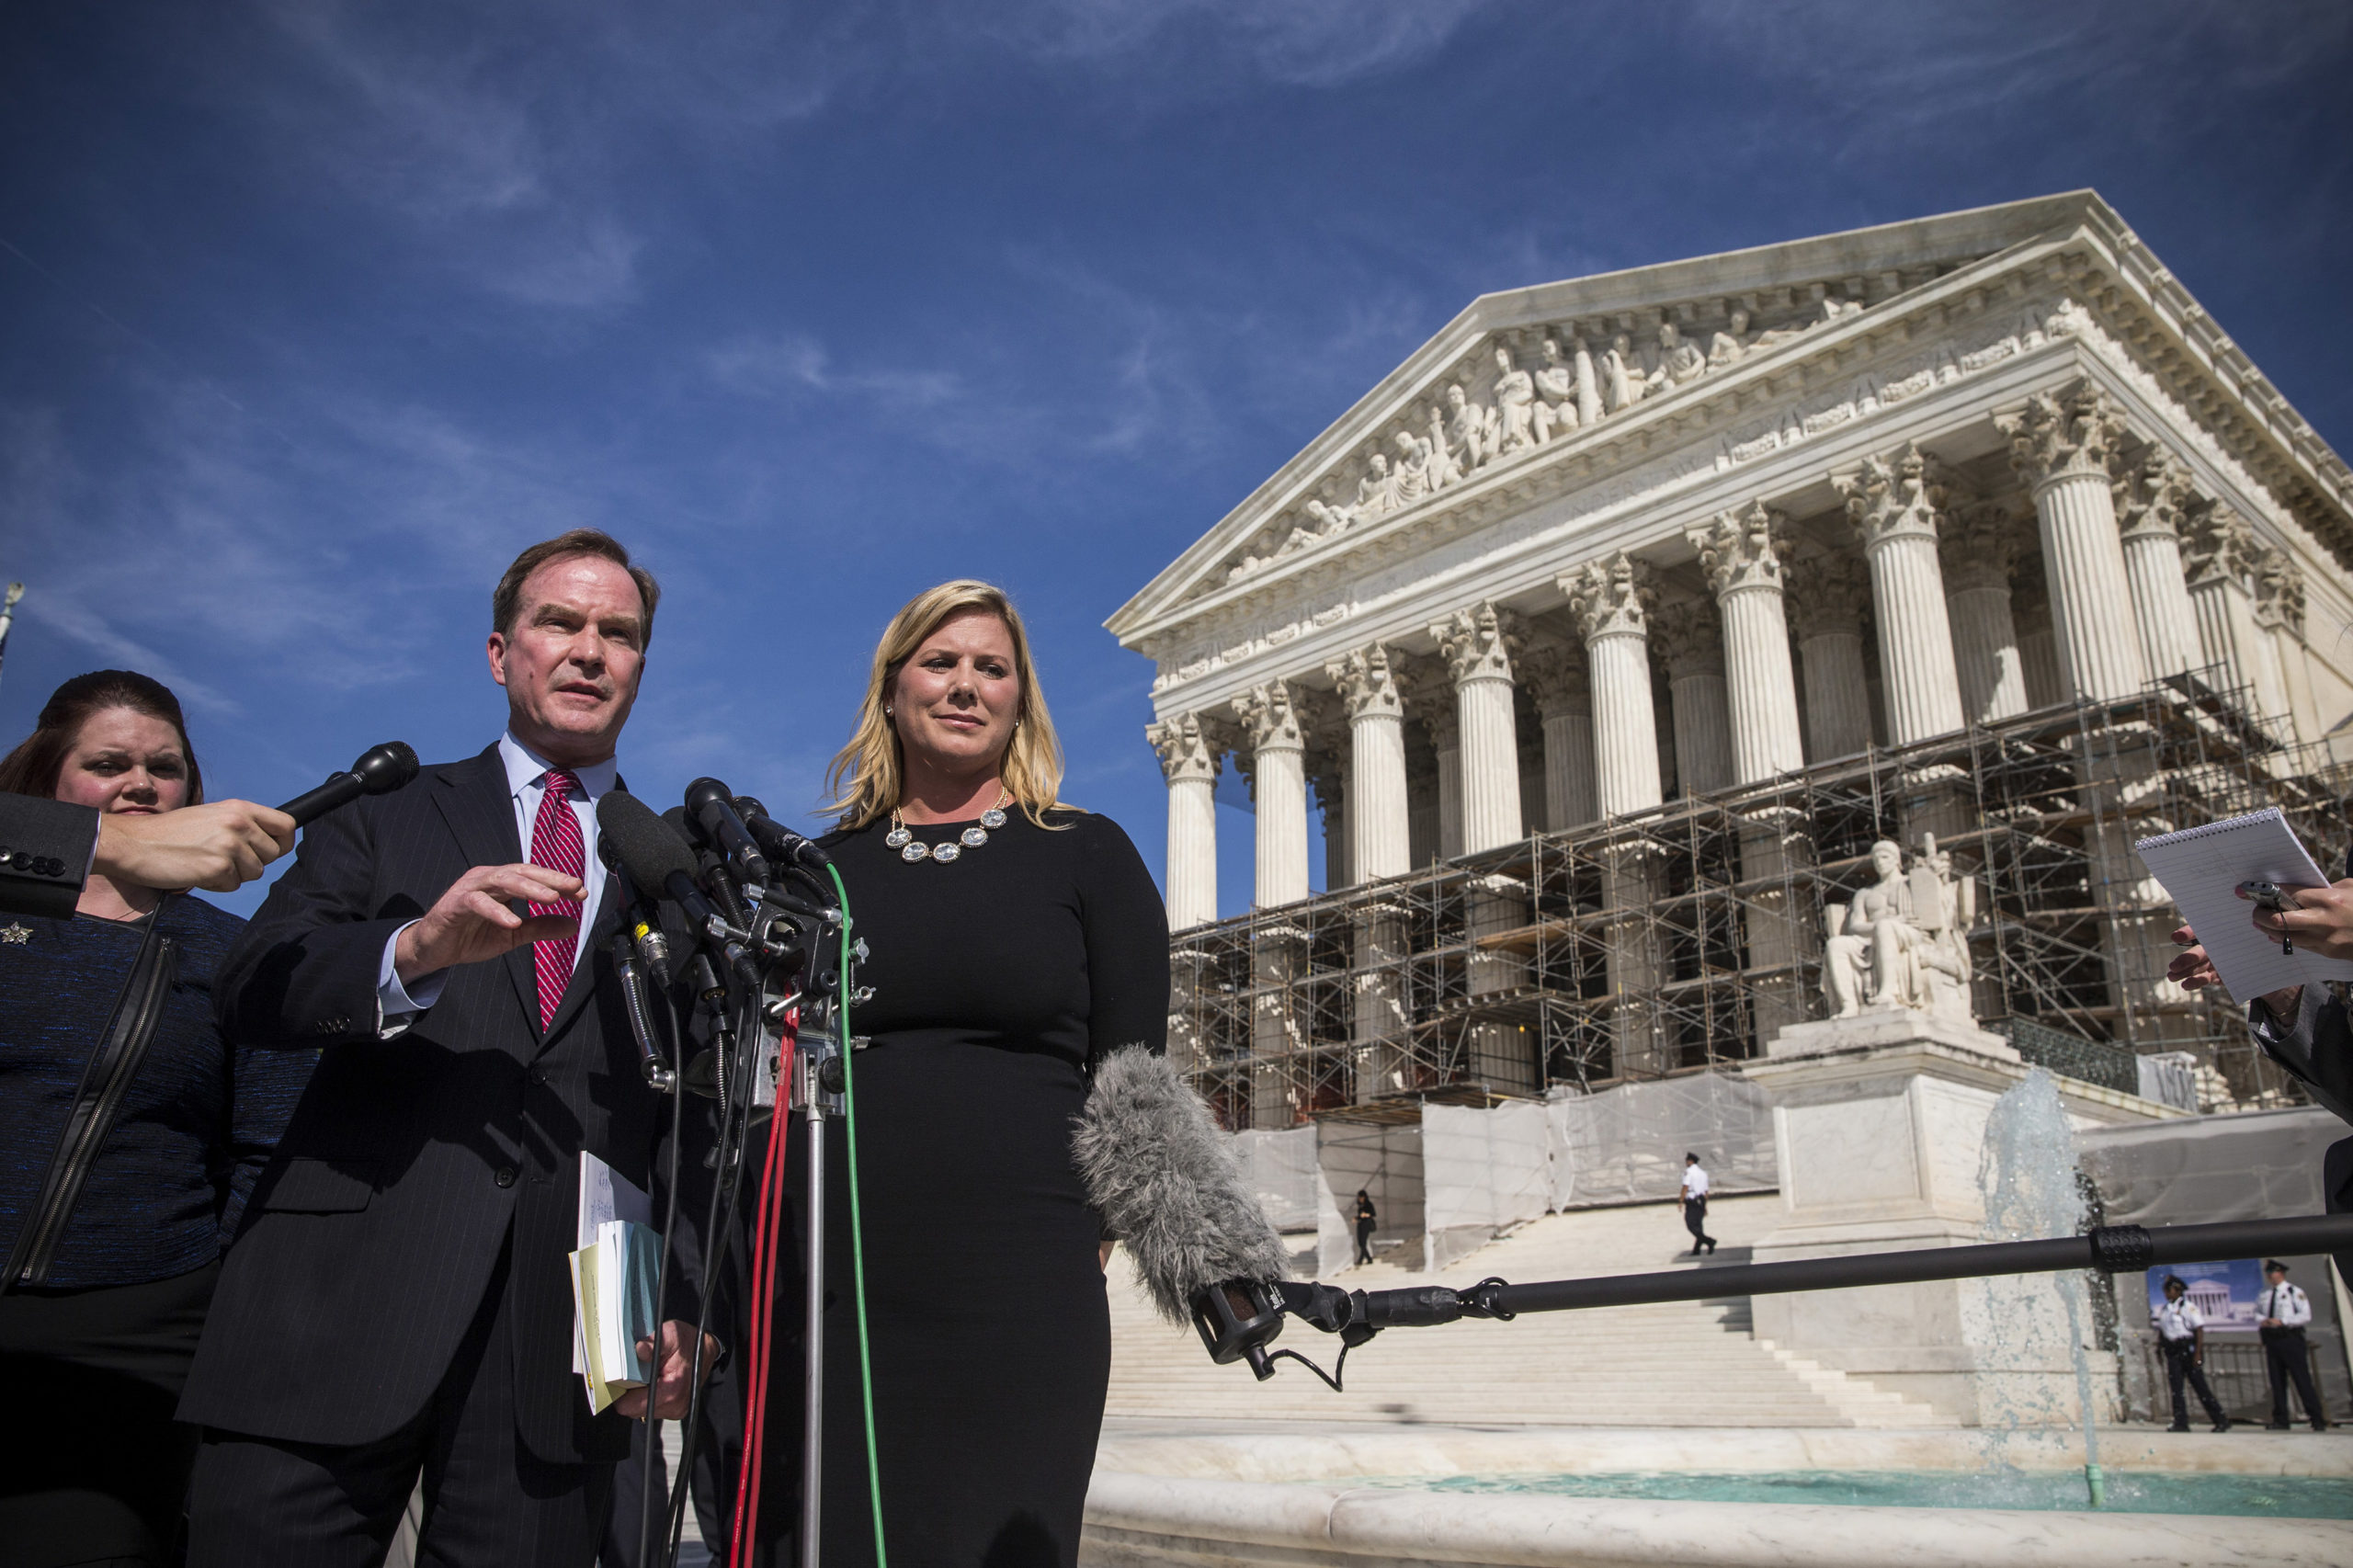 Jennifer Gratz (R), CEO of XIV Foundation and Michigan Attorney General Bill Schuette speak during a press conference outside the Supreme Court after going before the Supreme Court in "Schuette v. Coalition to Defend Affirmative Action" on October 15, 2013 in Washington, DC. The case revolves around affirmative action and whether or not states have the right to ban schools from using race as a consideration in school admissions. Gratz was involved in a previous Supreme Court case involving the same issues. (Photo by Andrew Burton/Getty Images)